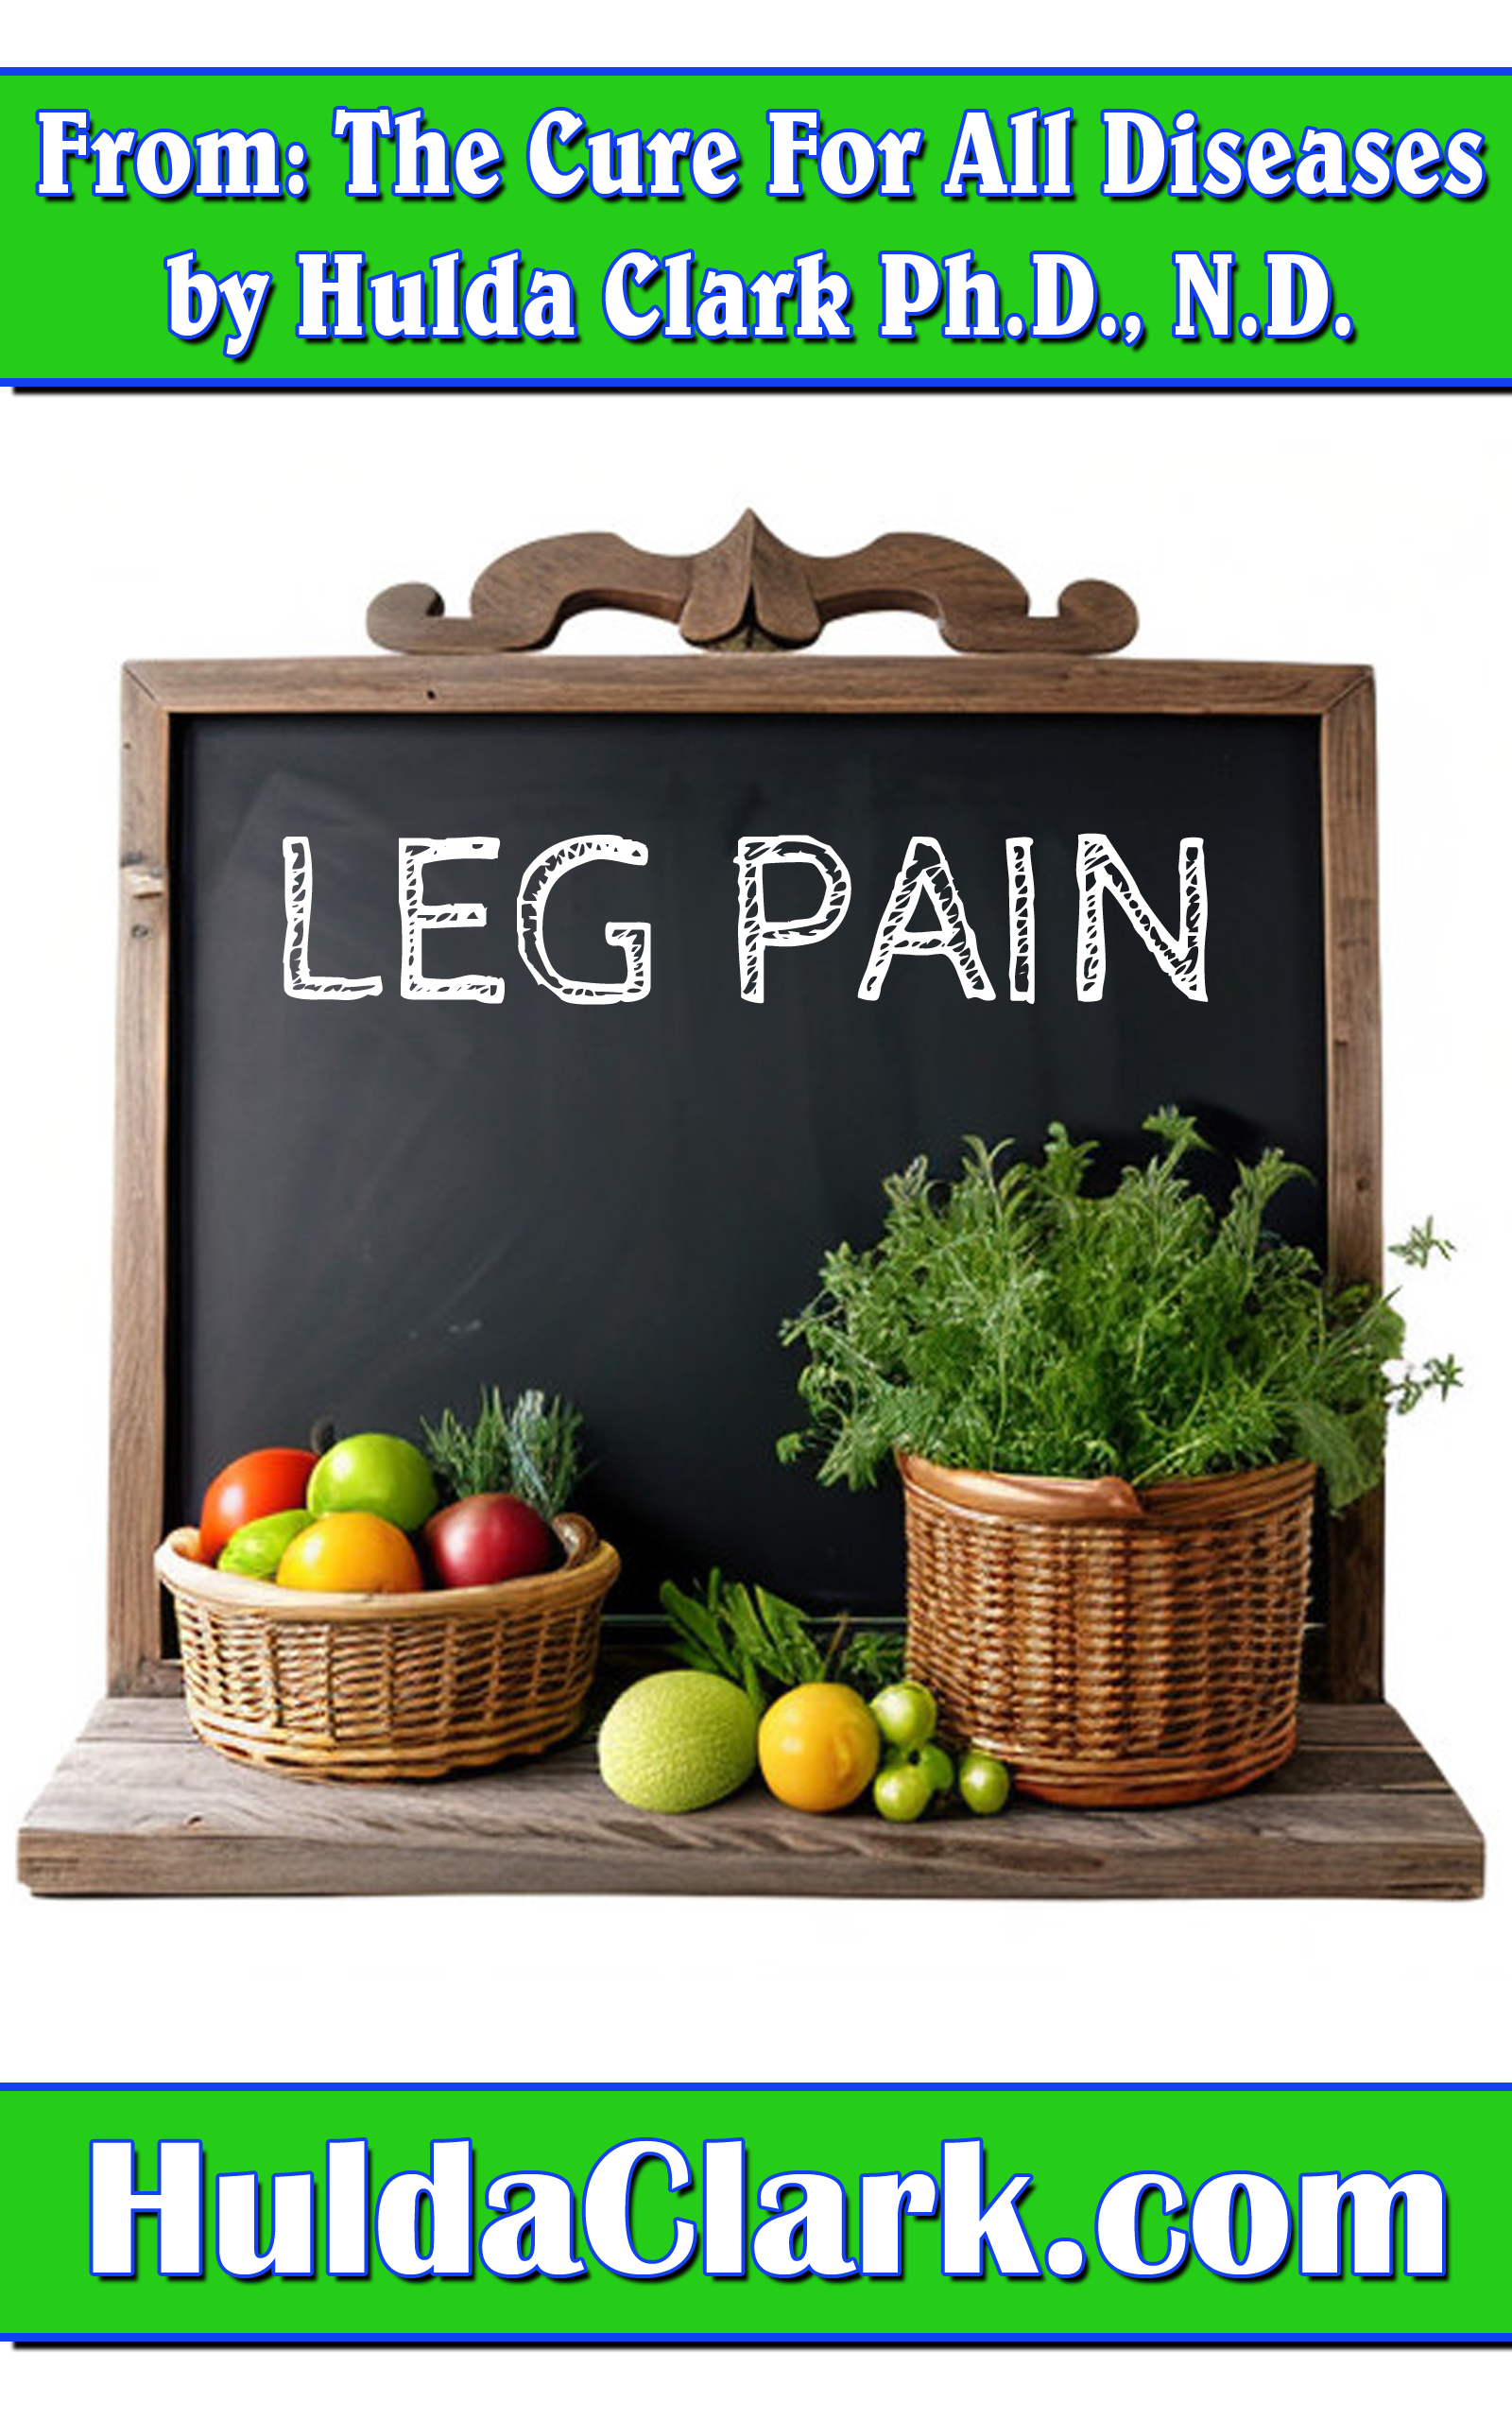 Leg Pain Ebook excerpt from The Cure for All Diseases by Hulda Clark